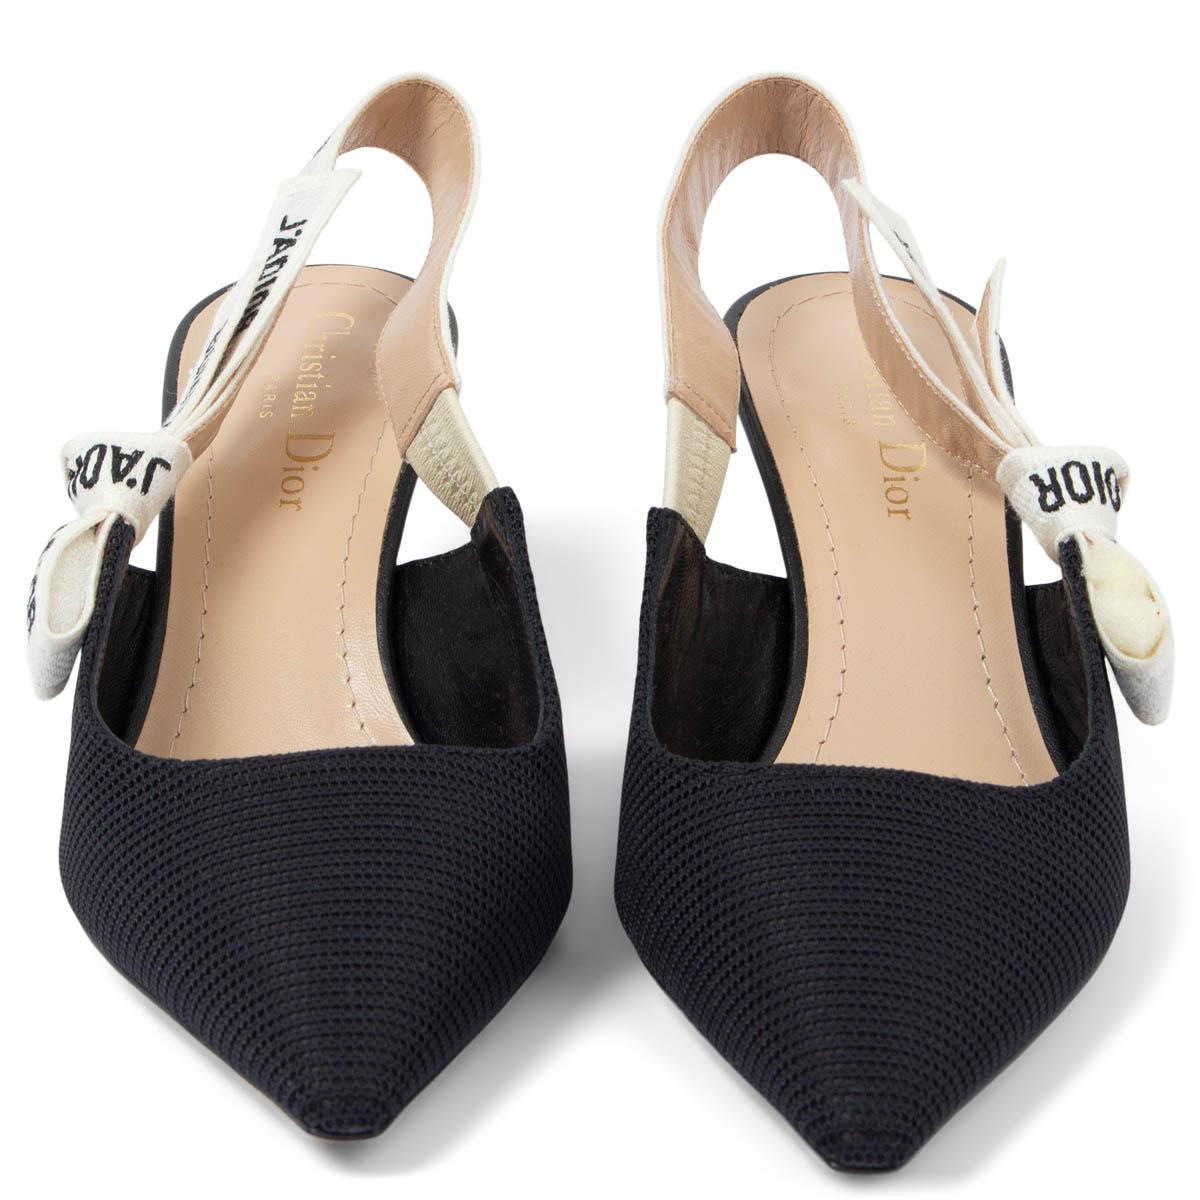 100% authentic Christian Dior J'ADIOR pumps in black technical fabric and leather with off-white ribbon detail is embellished with a flat bow and comma heel. Brand new. Come with dust bag. 

Measurements
Imprinted Size	37
Shoe Size	37
Inside